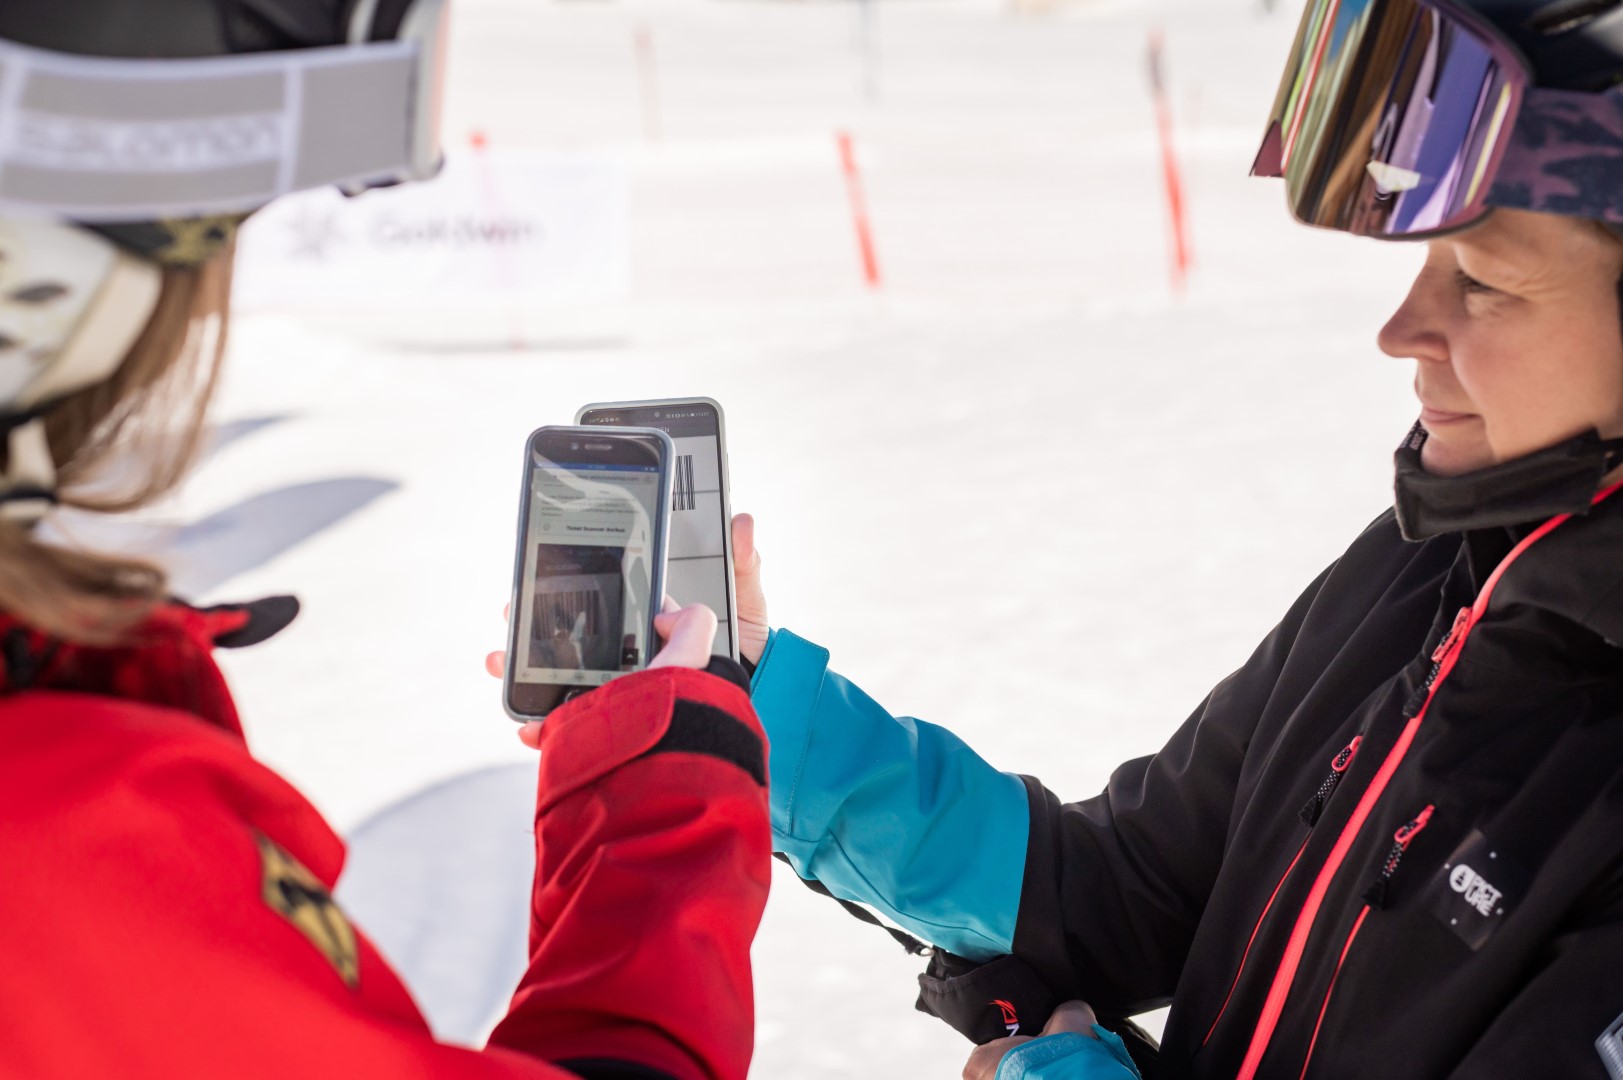 Ski instructor scans guest's digital ticket with smartphone